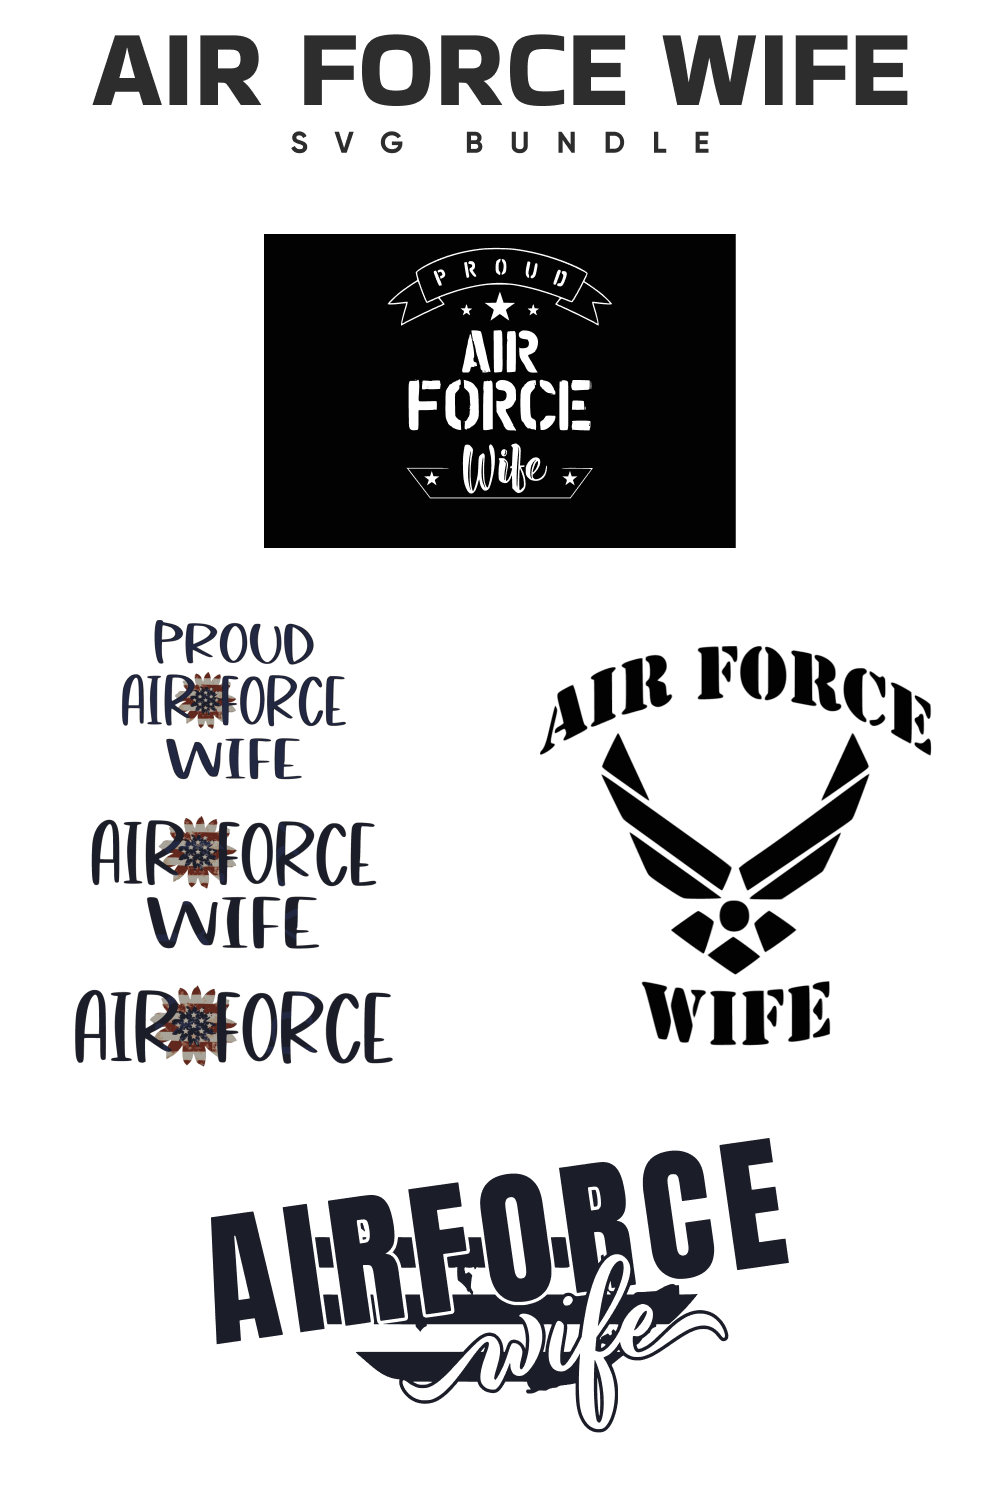 BW air force wife svg collection.